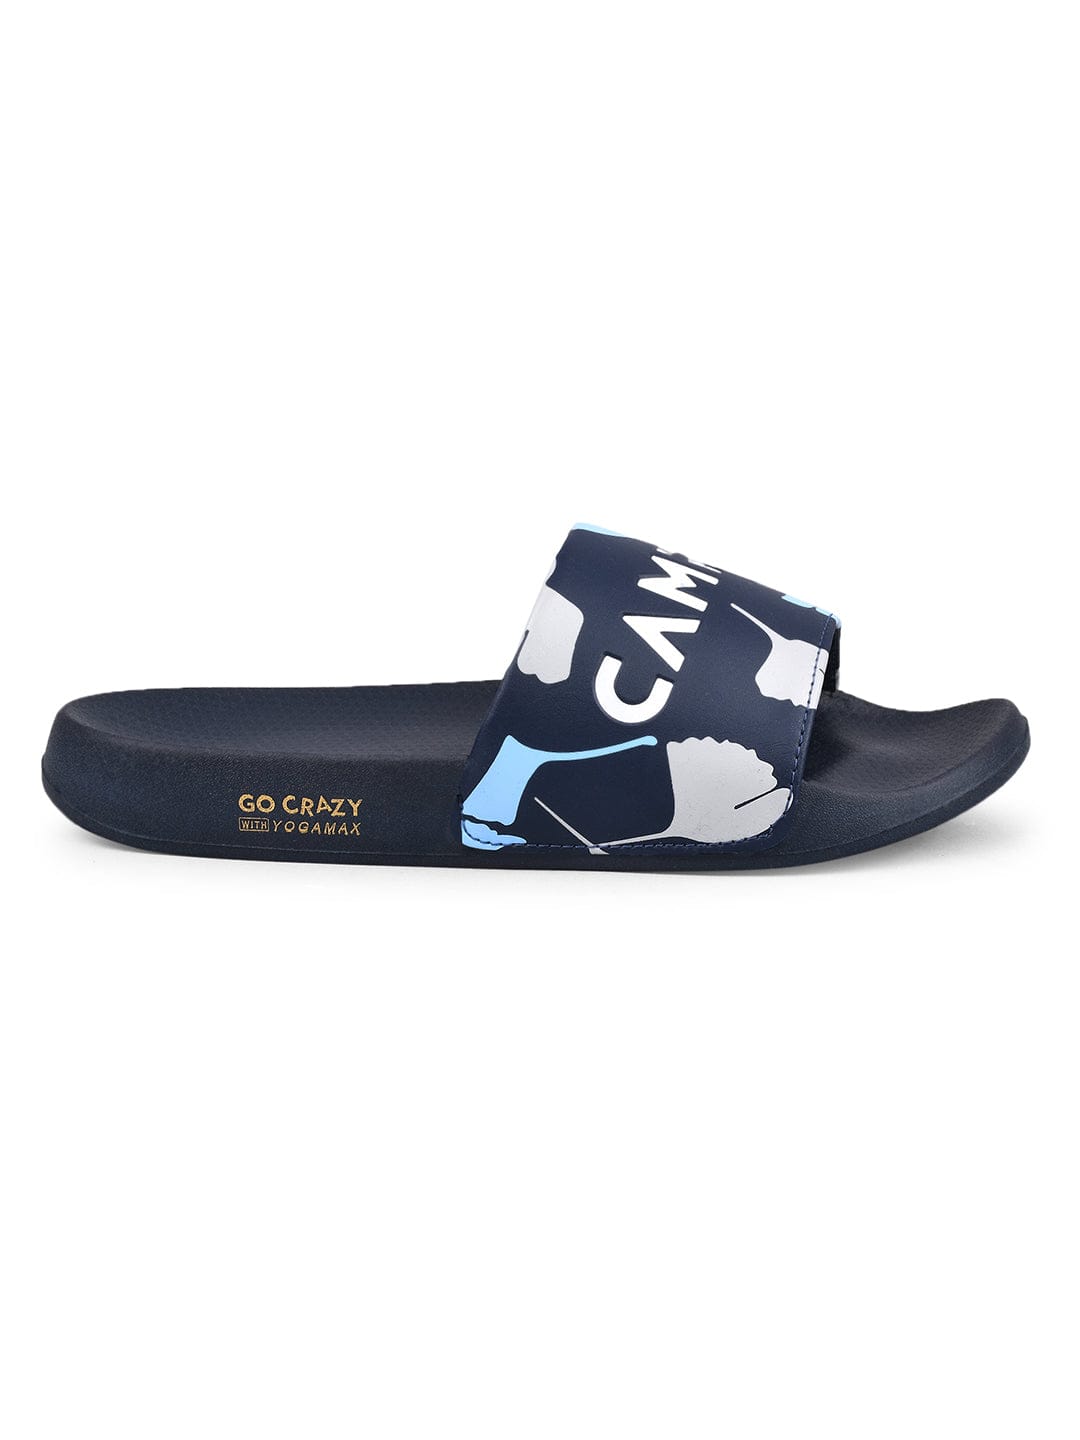 Buy Sliders For Men: Sl-433-Blu-L-Gry | Campus Shoes